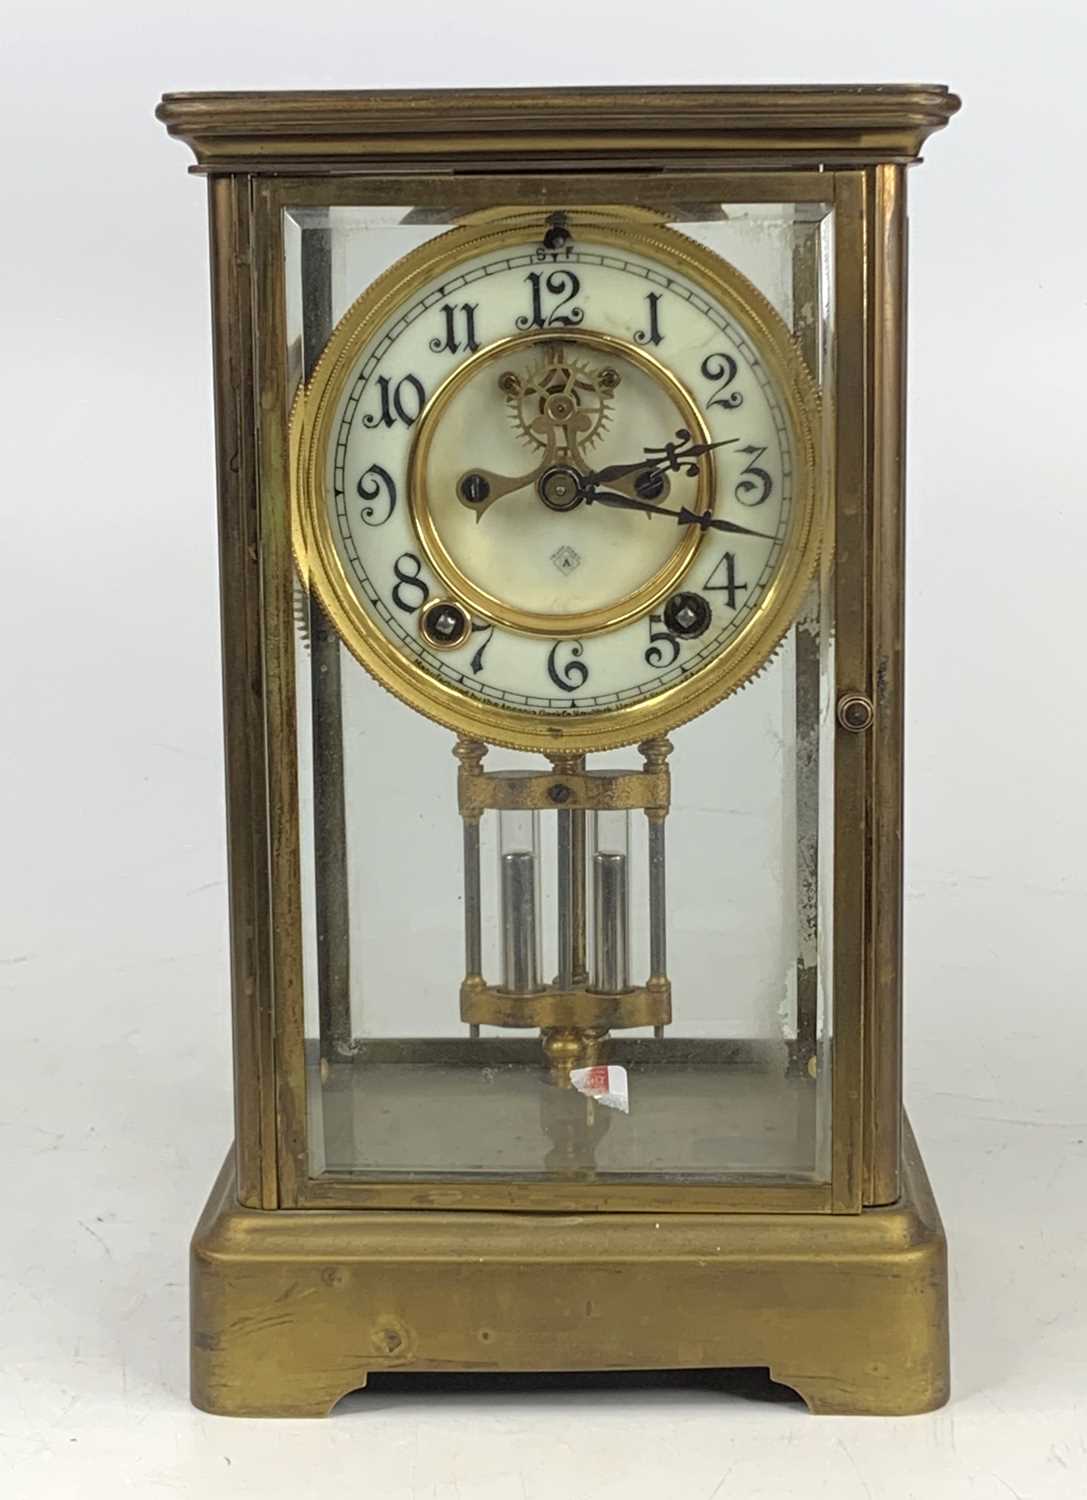 A circa 1900 lacquer brass four glass mantel clock, the dial with visible escapement and having faux